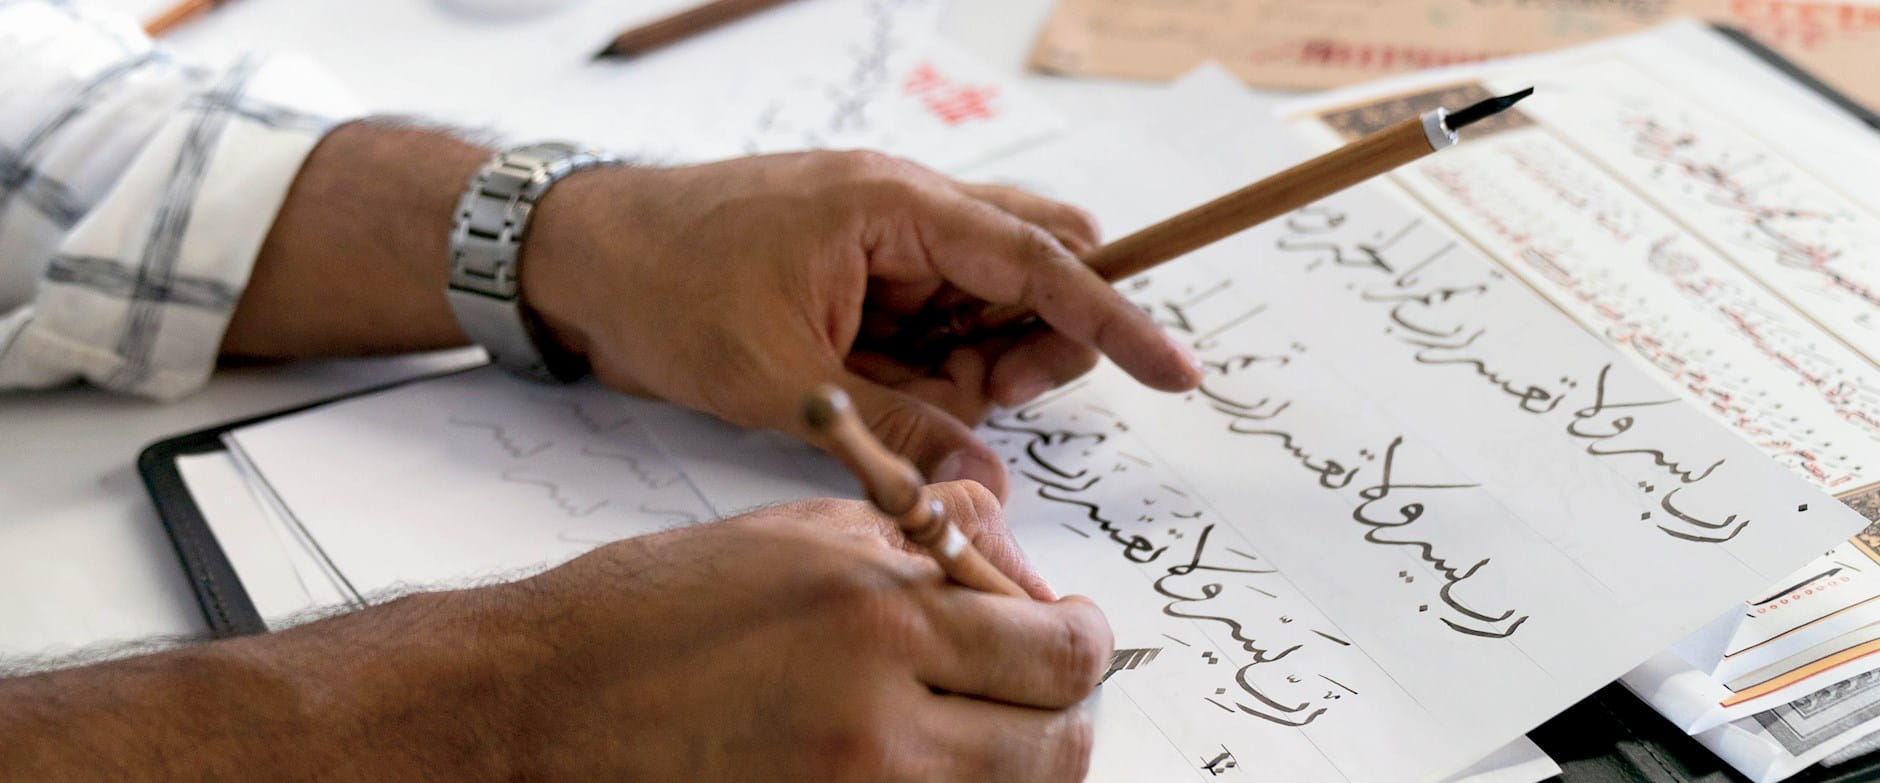 Zeeshan Farooq writing calligraphy into a notebook